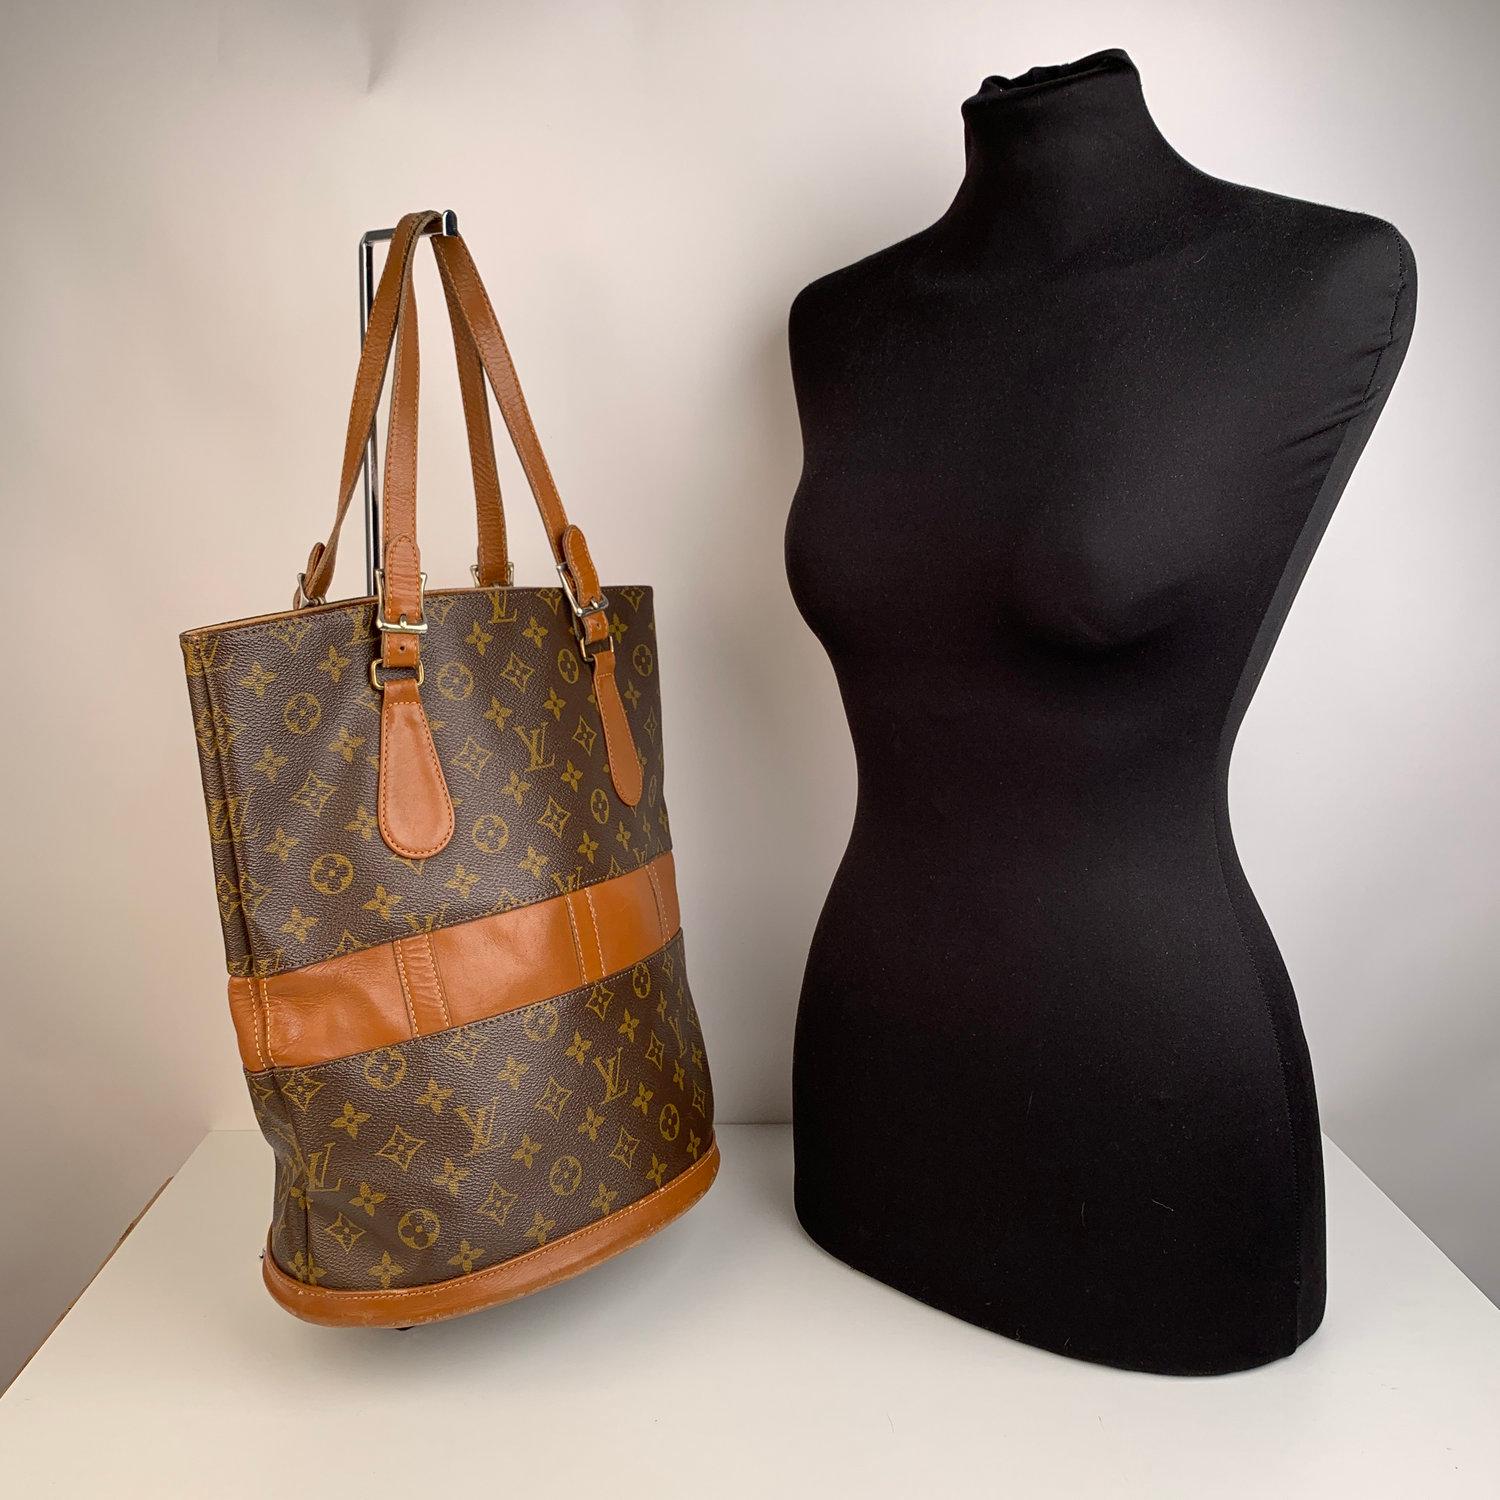 This beautiful Bag will come with a Certificate of Authenticity provided by Entrupy, leading International Fashion Authenticators. The certificate will be provided at no further cost.

Vintage LOUIS VUITTON Monogram Bucket Bag is a vintage LOUIS